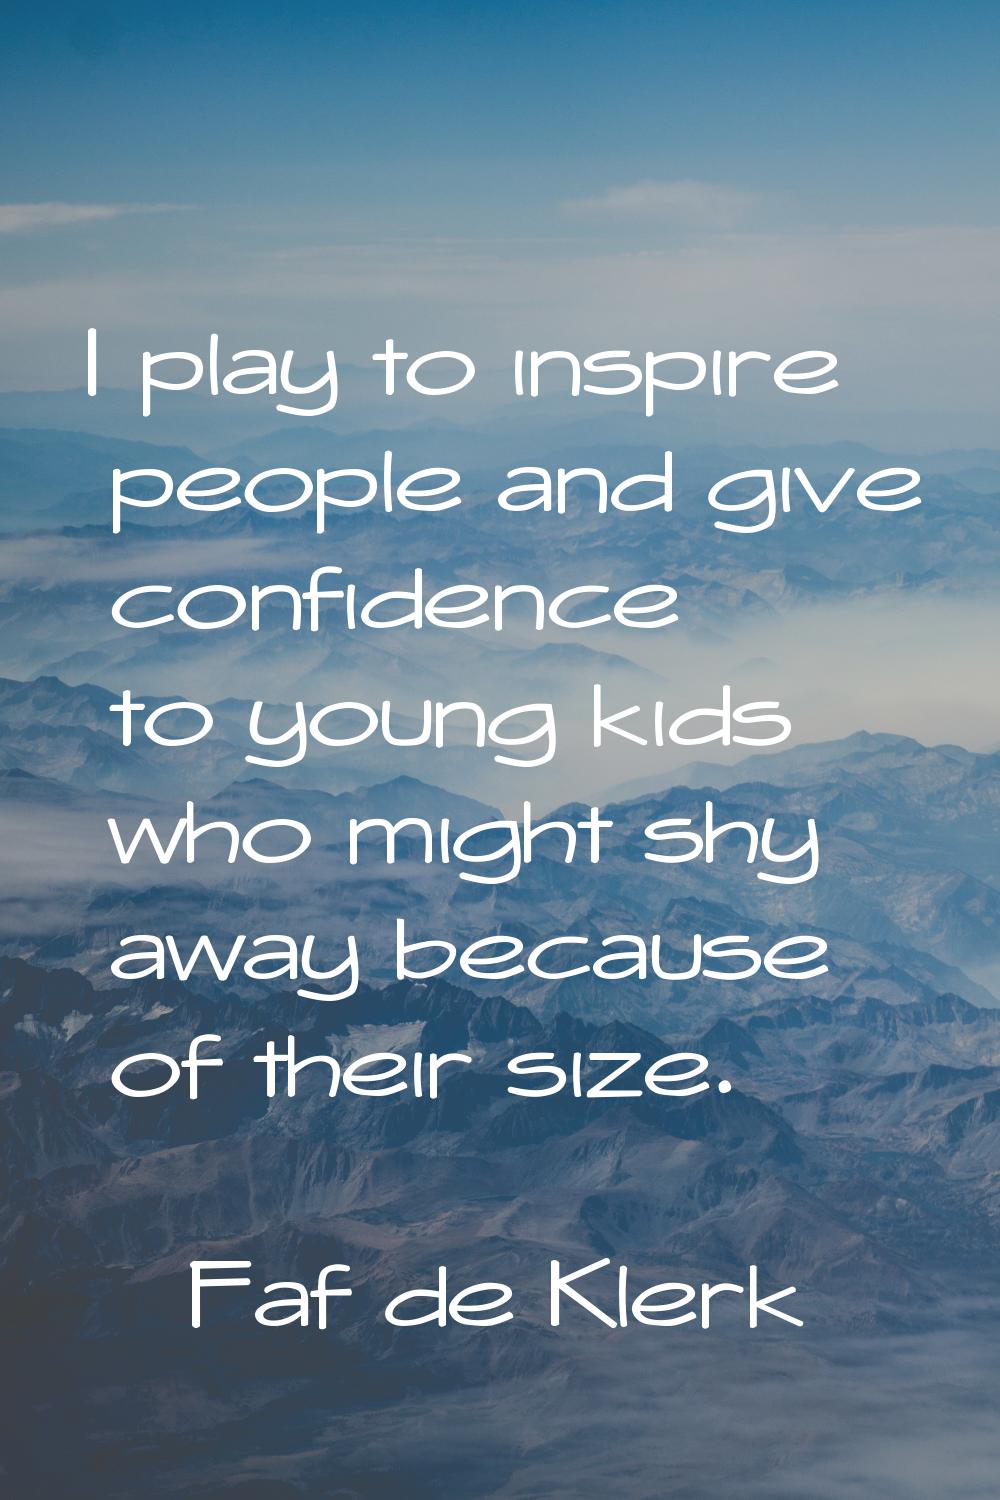 I play to inspire people and give confidence to young kids who might shy away because of their size